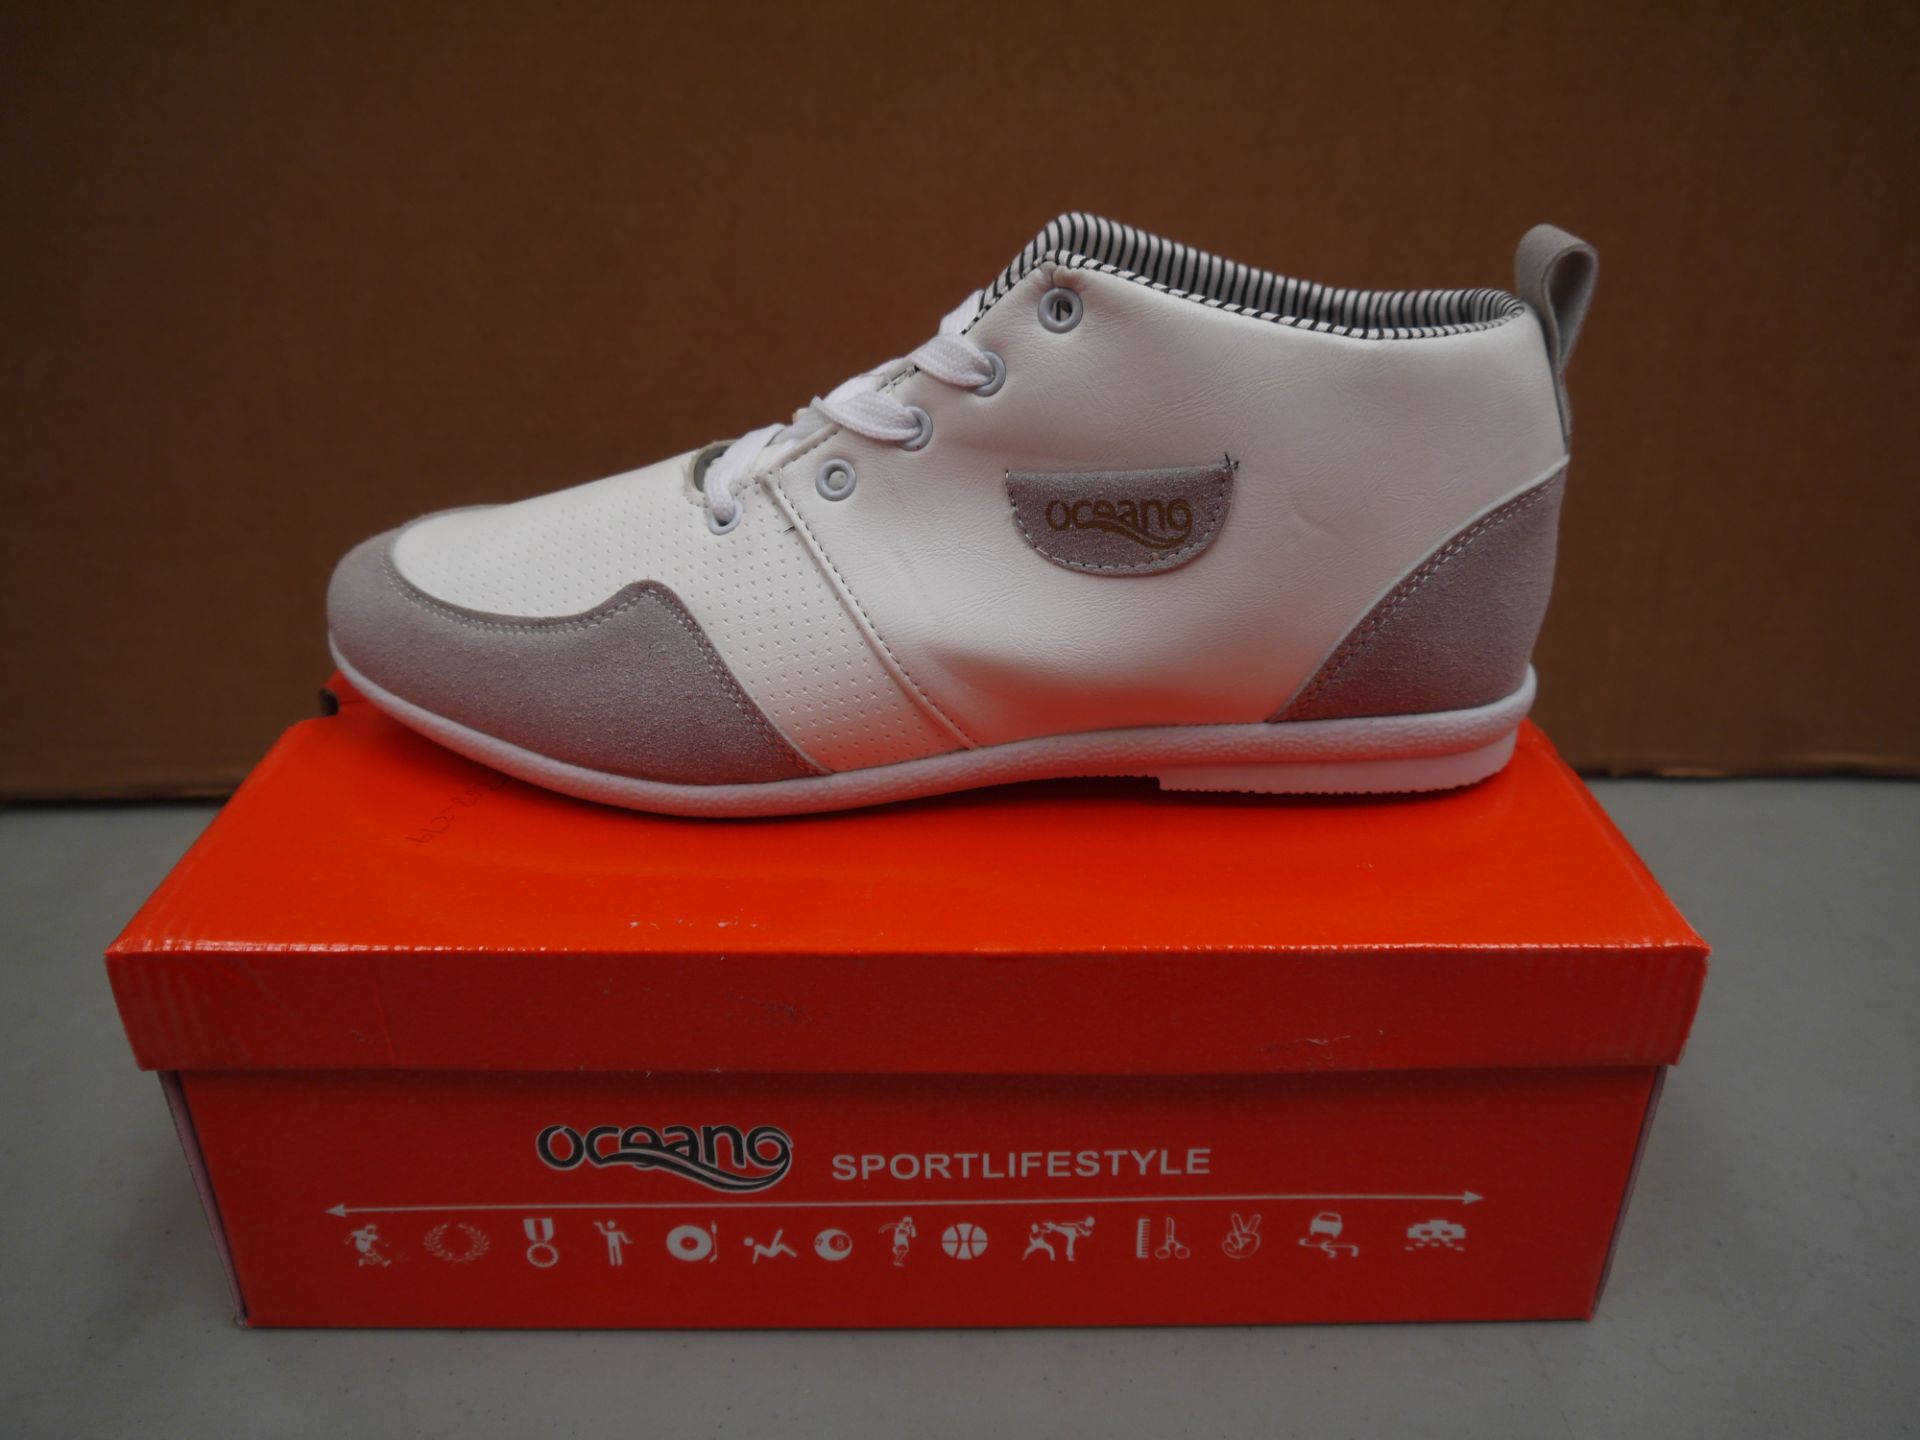 Mens white Suede and leather Oceano trainer style boot new and boxed size UK8